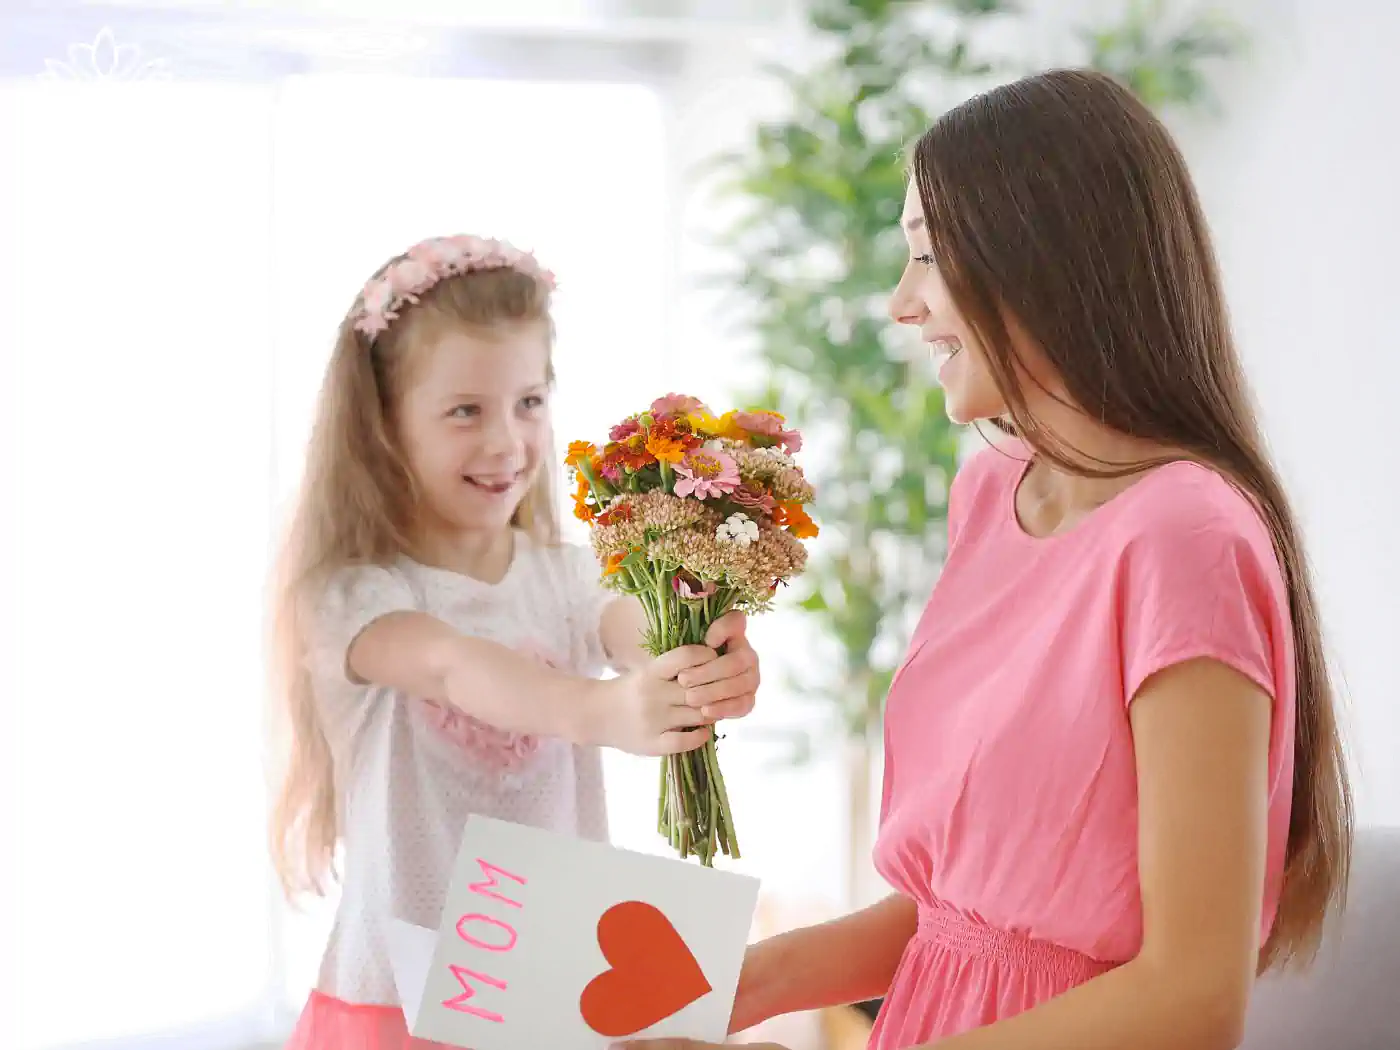 Image of a young girl giving a flower bouquet to her smiling mother, who is holding a card. Fabulous Flowers and Gifts - Luxury Flower Bouquets.